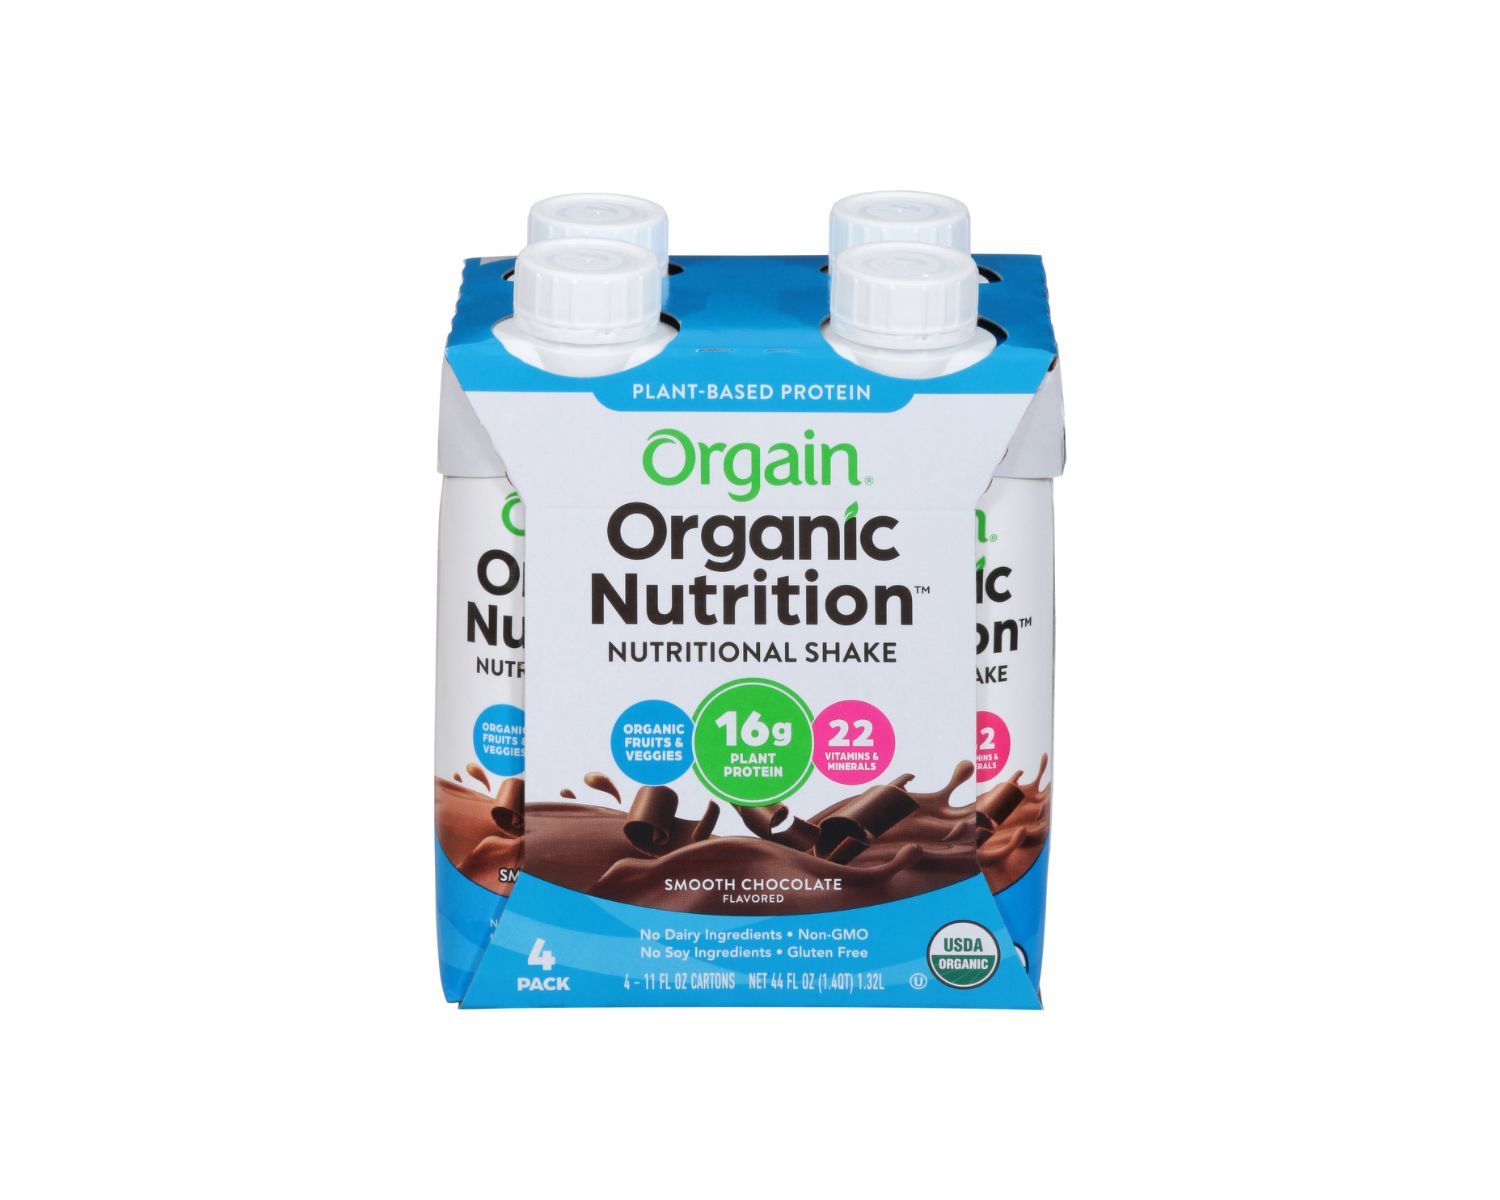 18-orgain-organic-protein-shake-nutrition-facts